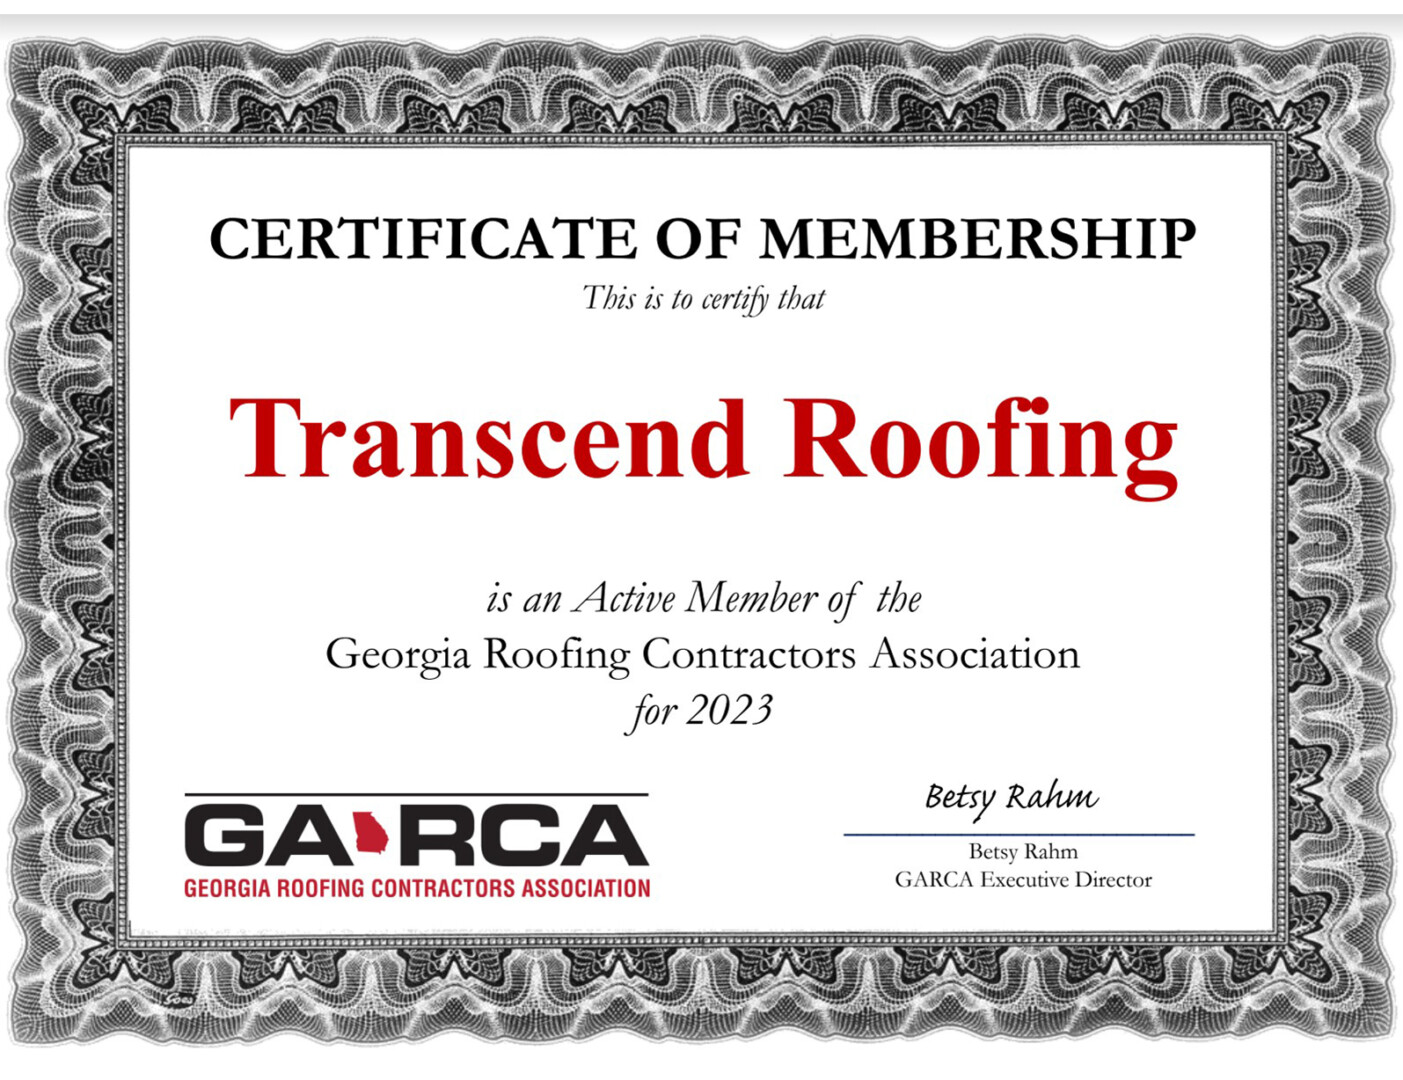 transcend roofing certifications 0001 Screenshot 11 - About